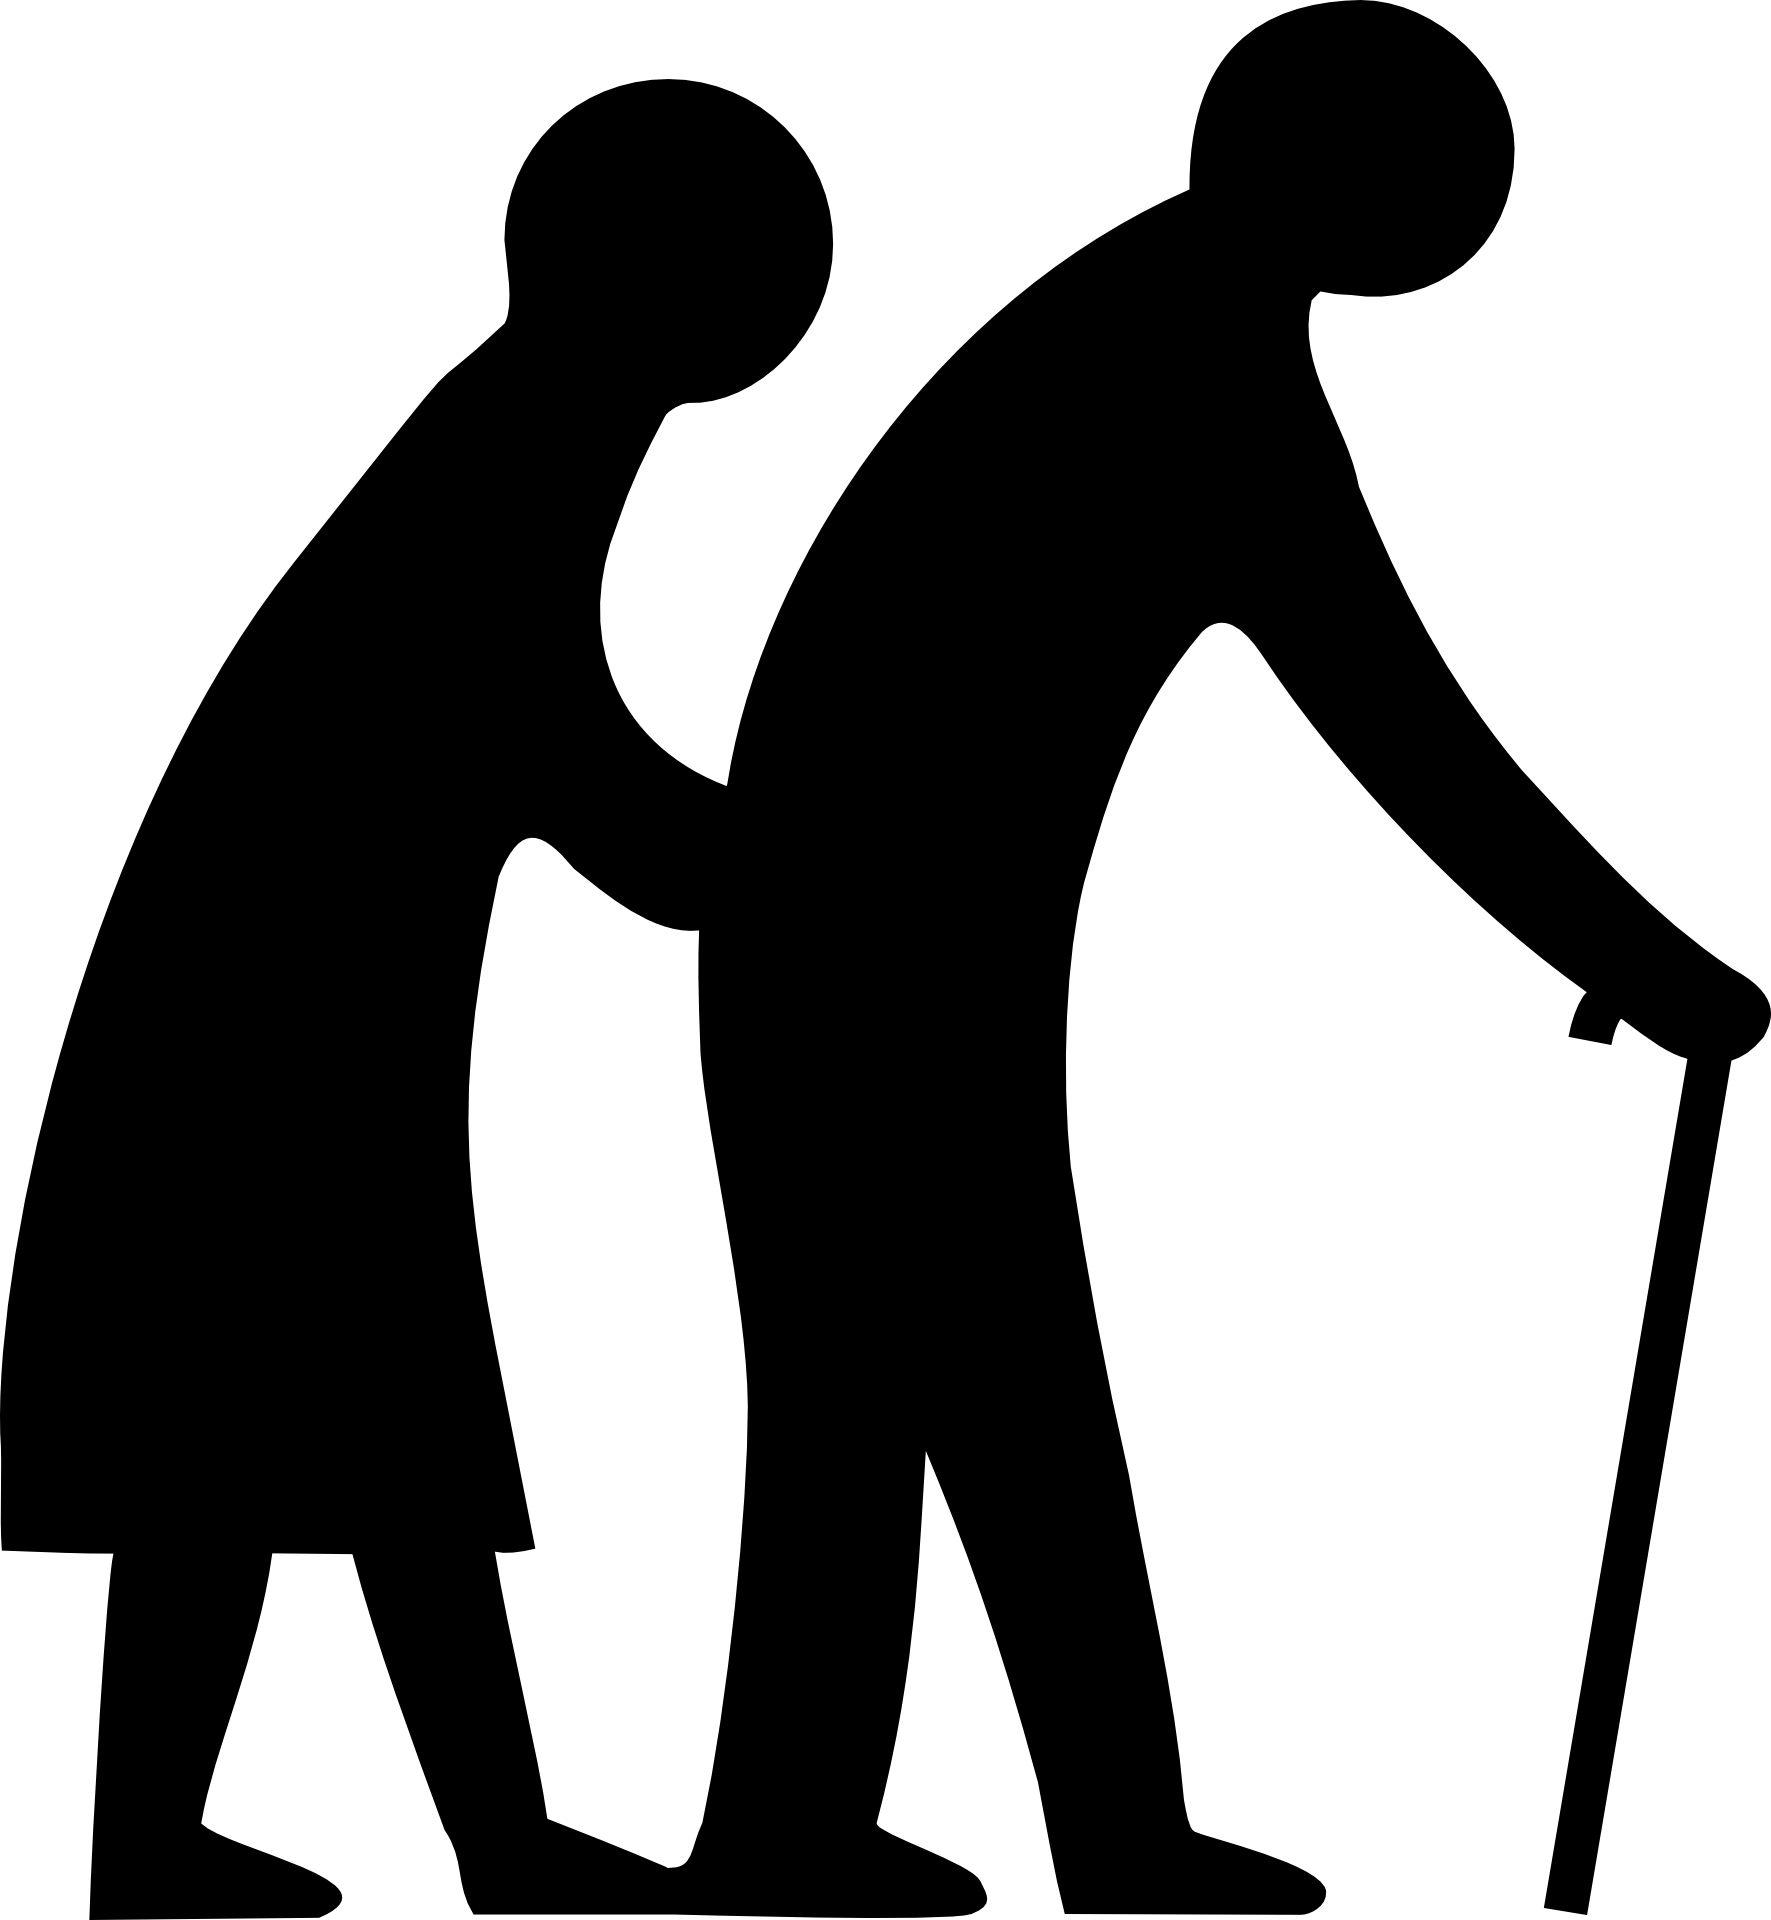 Old People Silhouette Clip Art